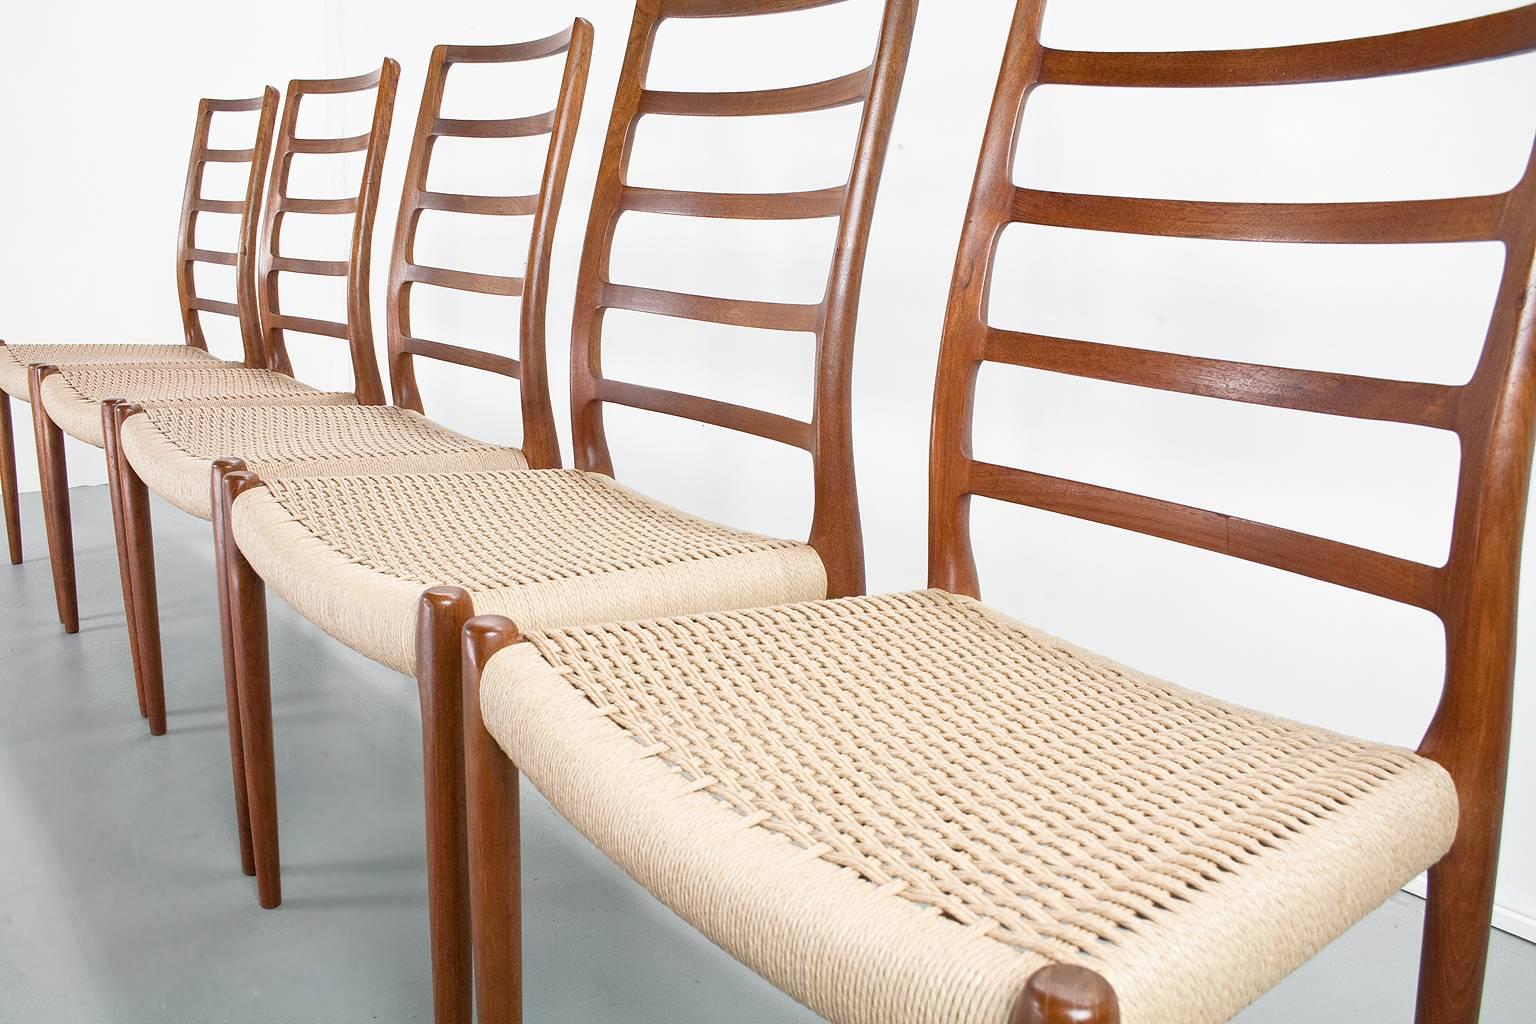 Oiled Set of 5 Scandinavian Modern Chairs in teak and paper cord by Niels Moller